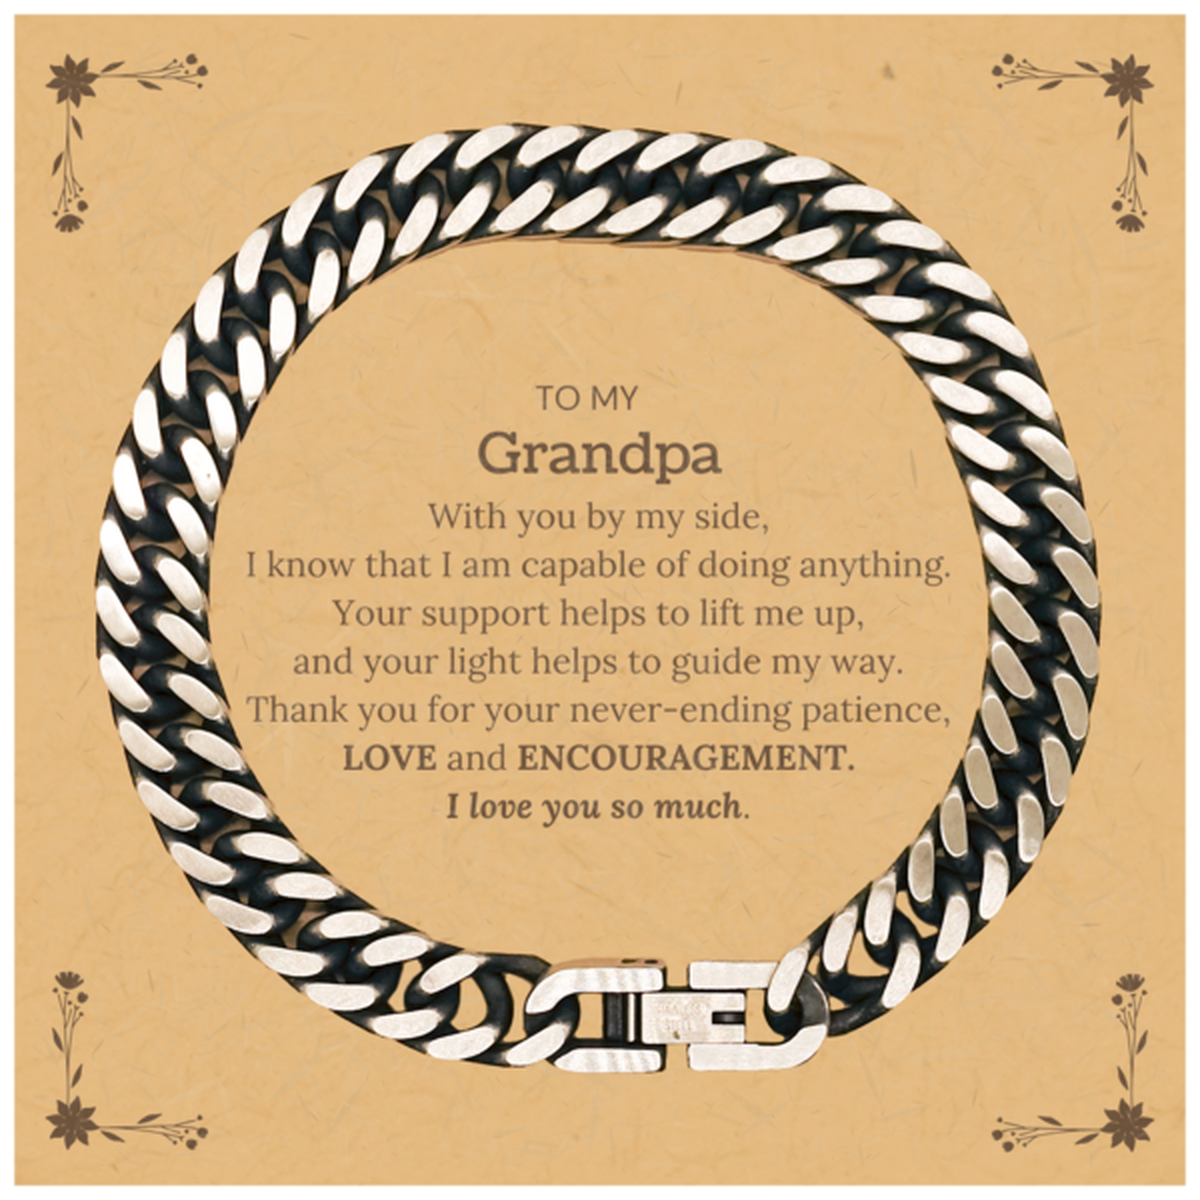 Appreciation Grandpa Cuban Link Chain Bracelet Gifts, To My Grandpa Birthday Christmas Wedding Keepsake Gifts for Grandpa With you by my side, I know that I am capable of doing anything. I love you so much